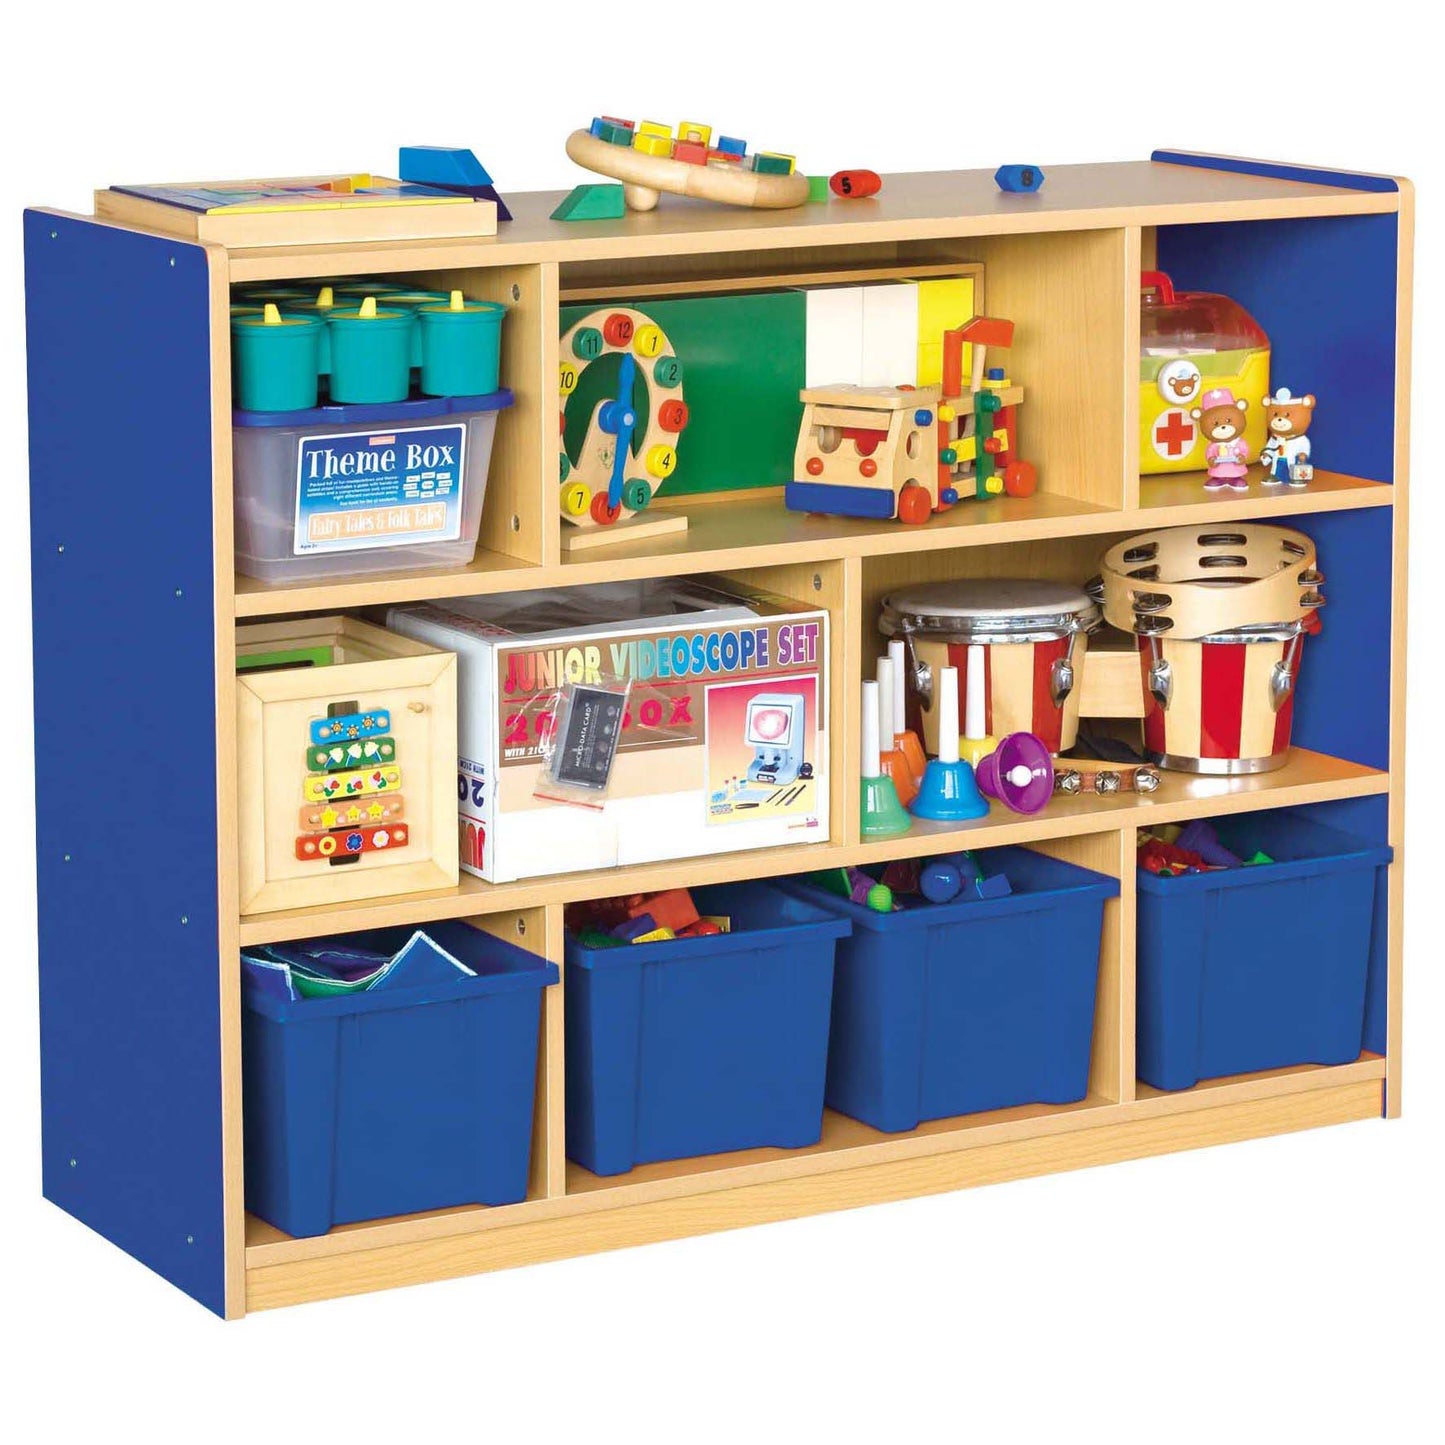 Milan 8 Compartment Cabinet Blue – 4 Trays